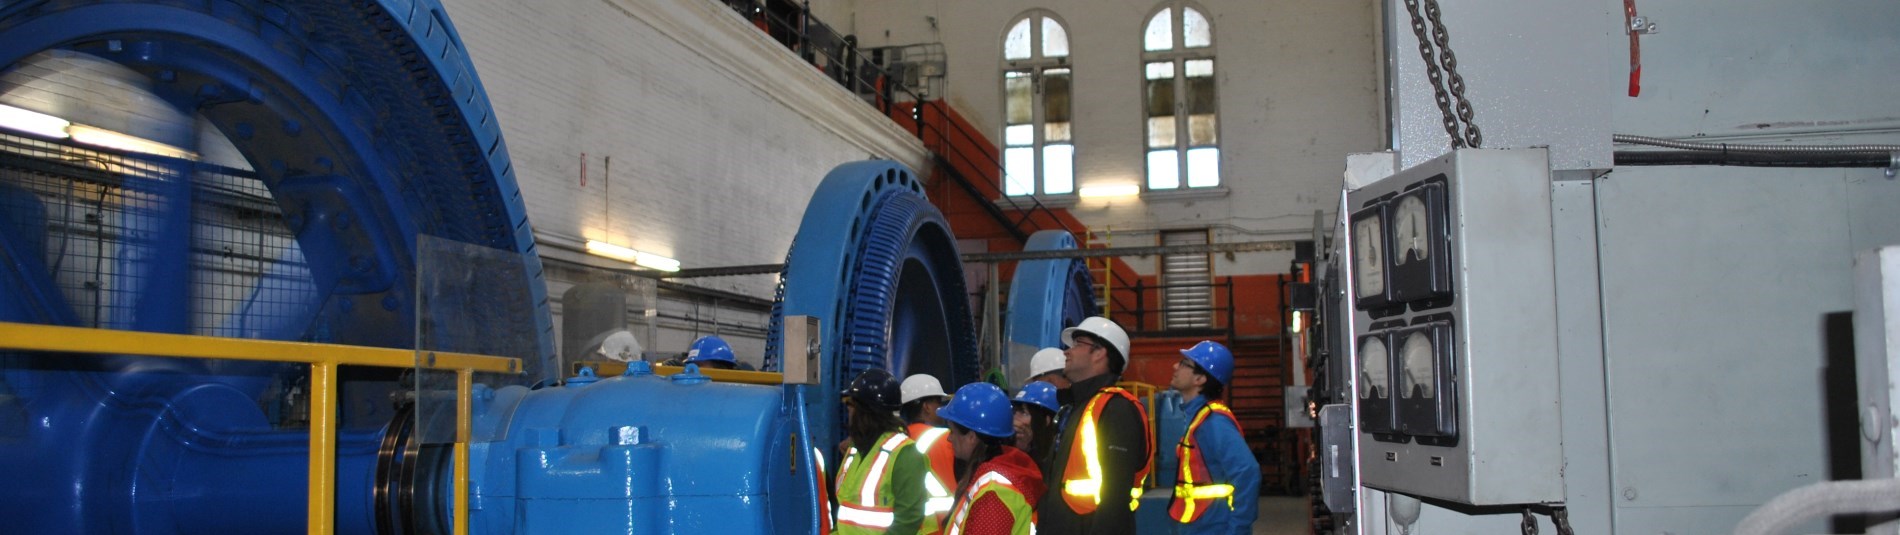 group of people looking at a generator